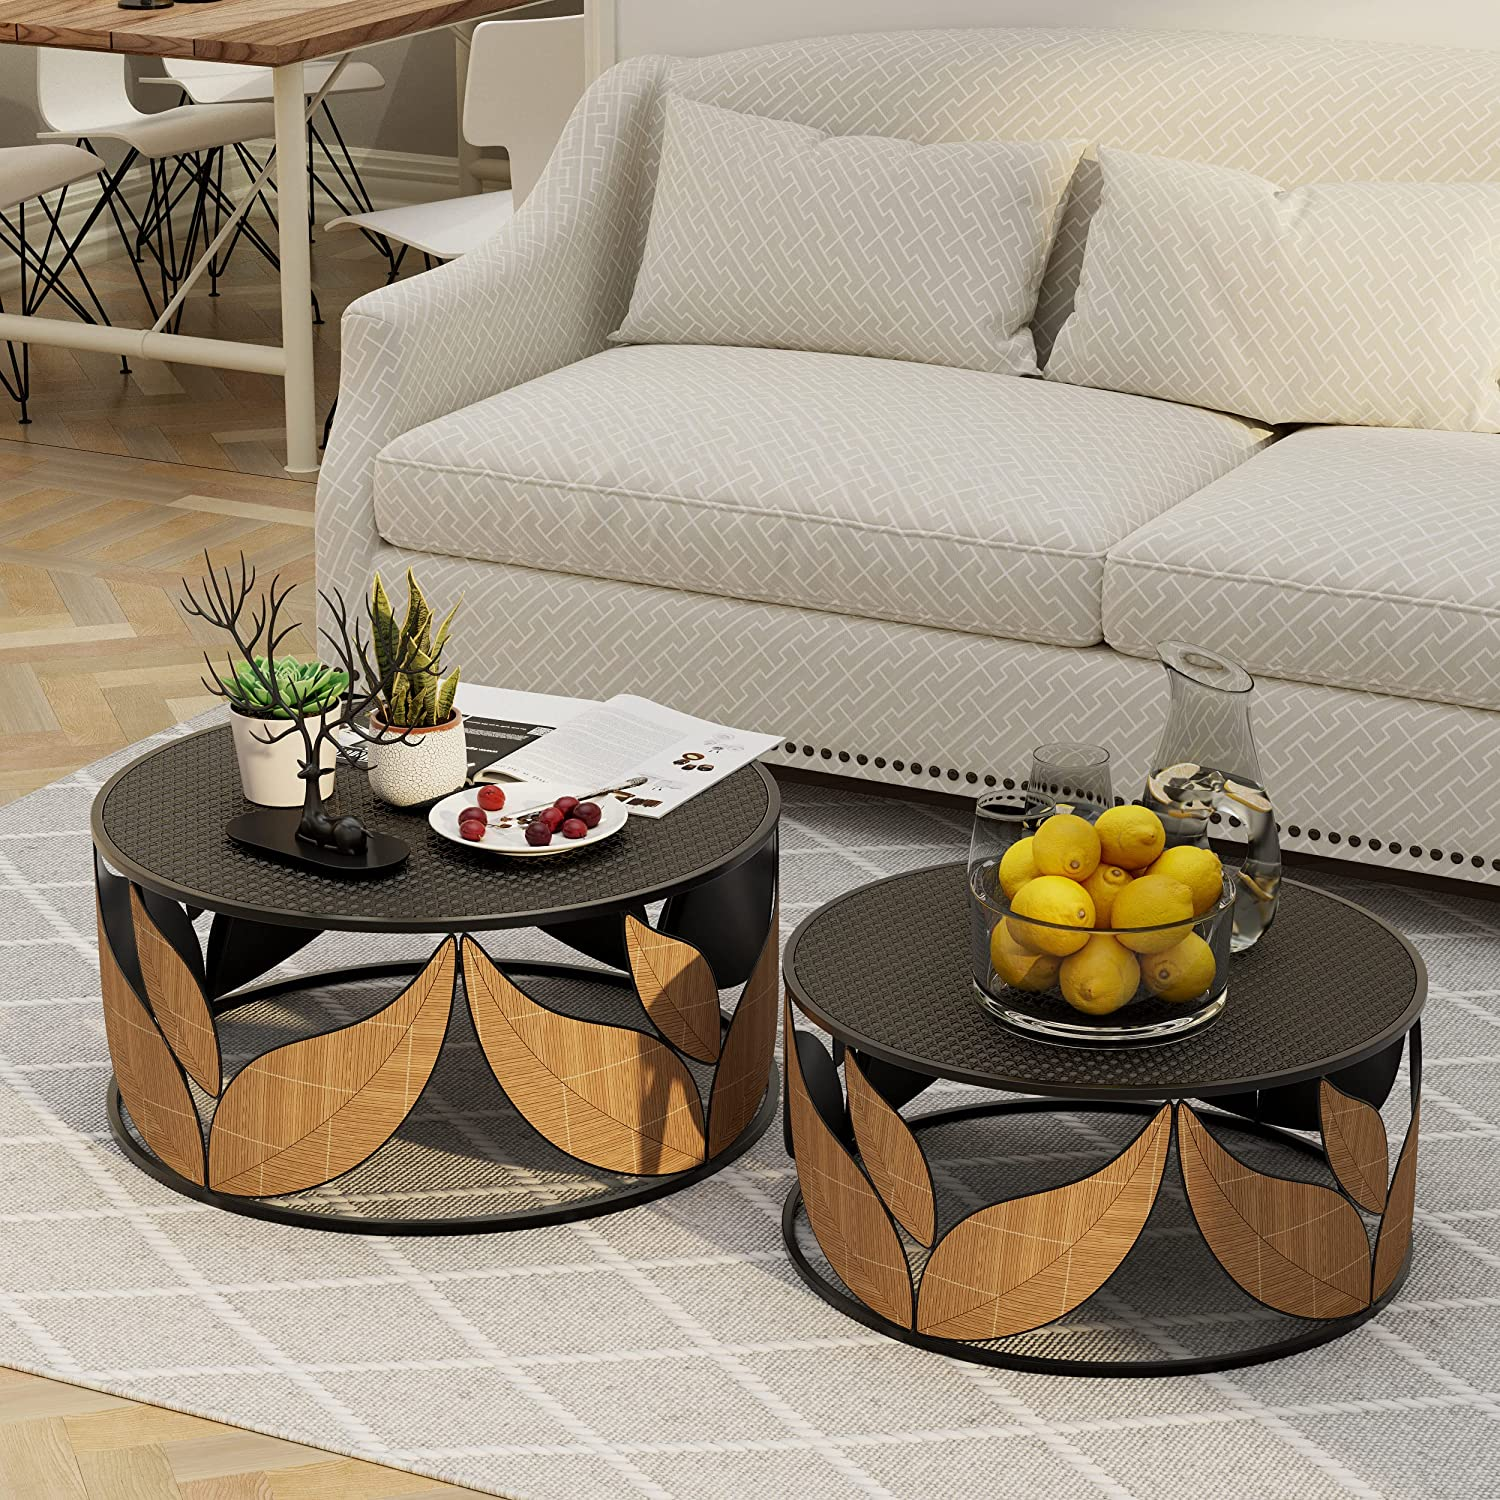 Goods2UQuick Modern Nesting Coffee Table Set of 2, Round Industrial Coffee Table Fully-Assembled Circle Coffee Table with Leaf Decoration for Living Room, Bedroom, Farmhouse ，Black